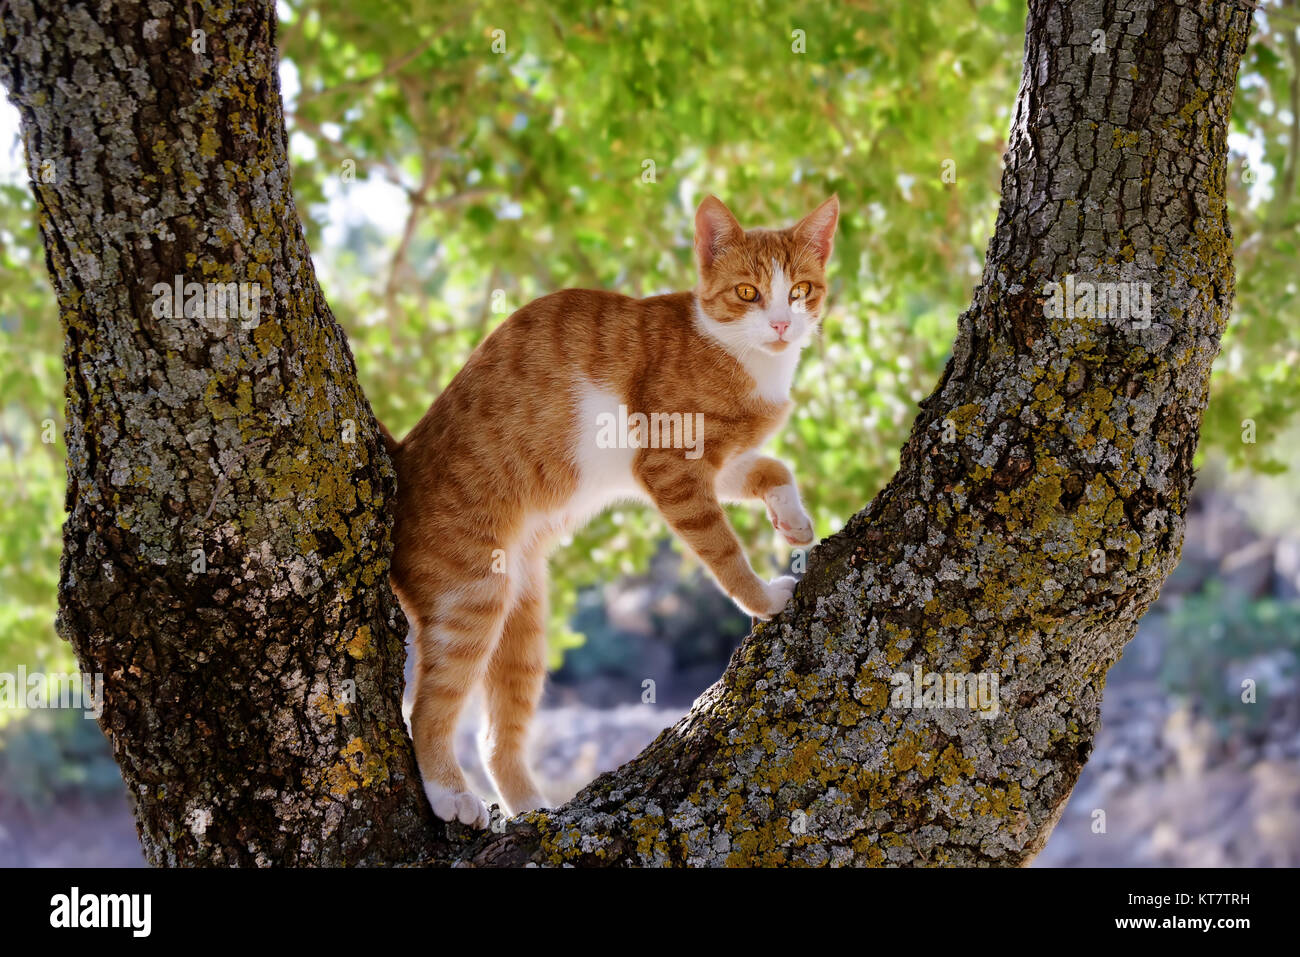 A red tabby and white cat kitten climbing curiously and playful on a tree with thick branches, Greece. Stock Photo